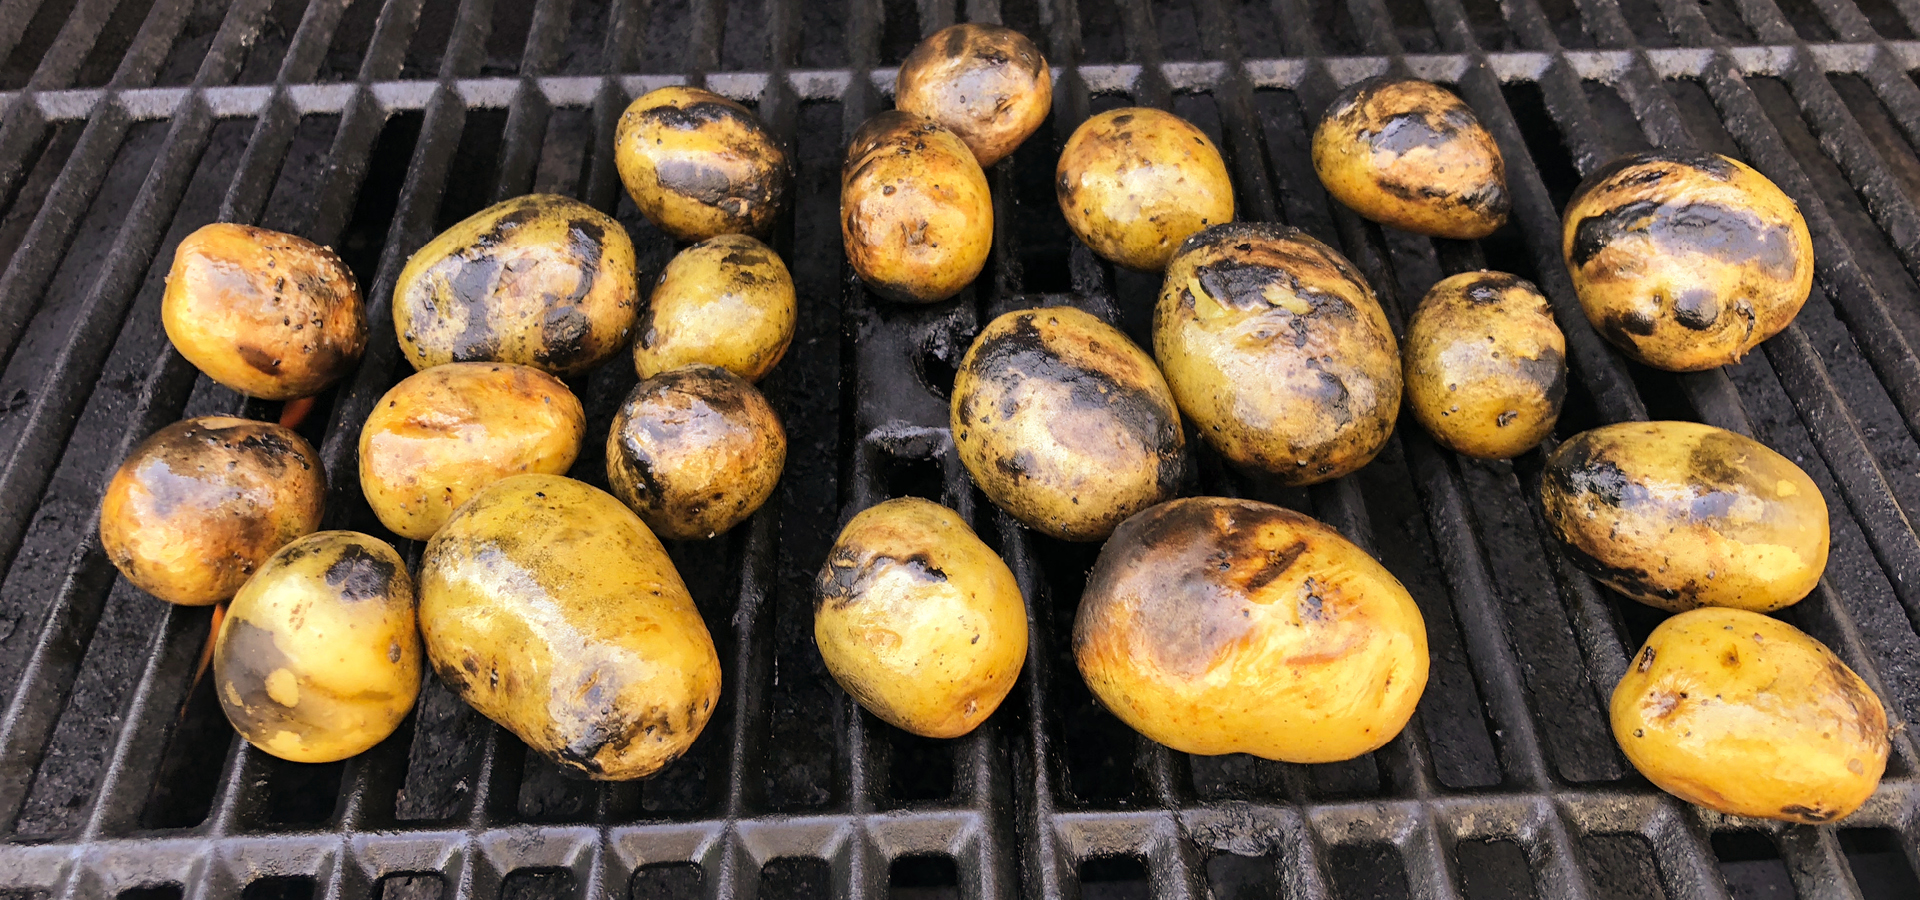 grill-the-potatoes